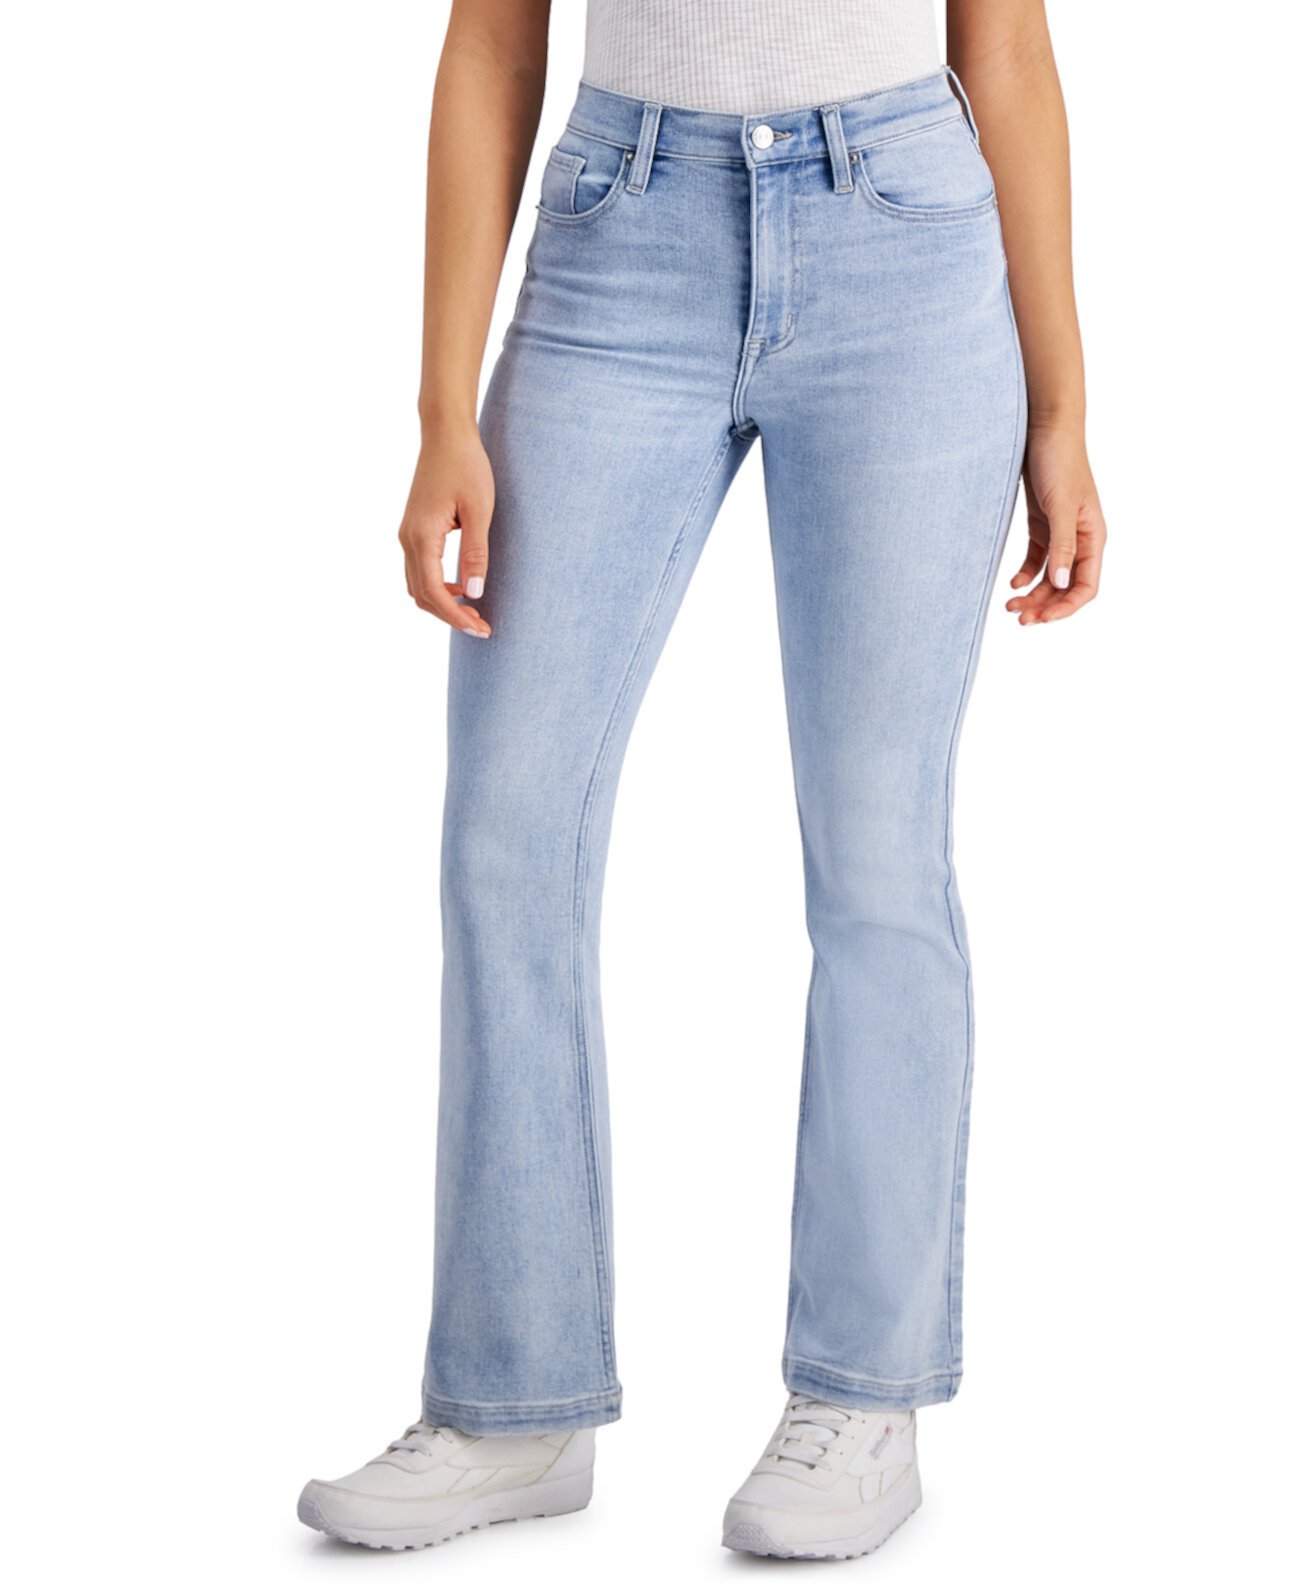 Women's High-Rise Flare Jeans DKNY